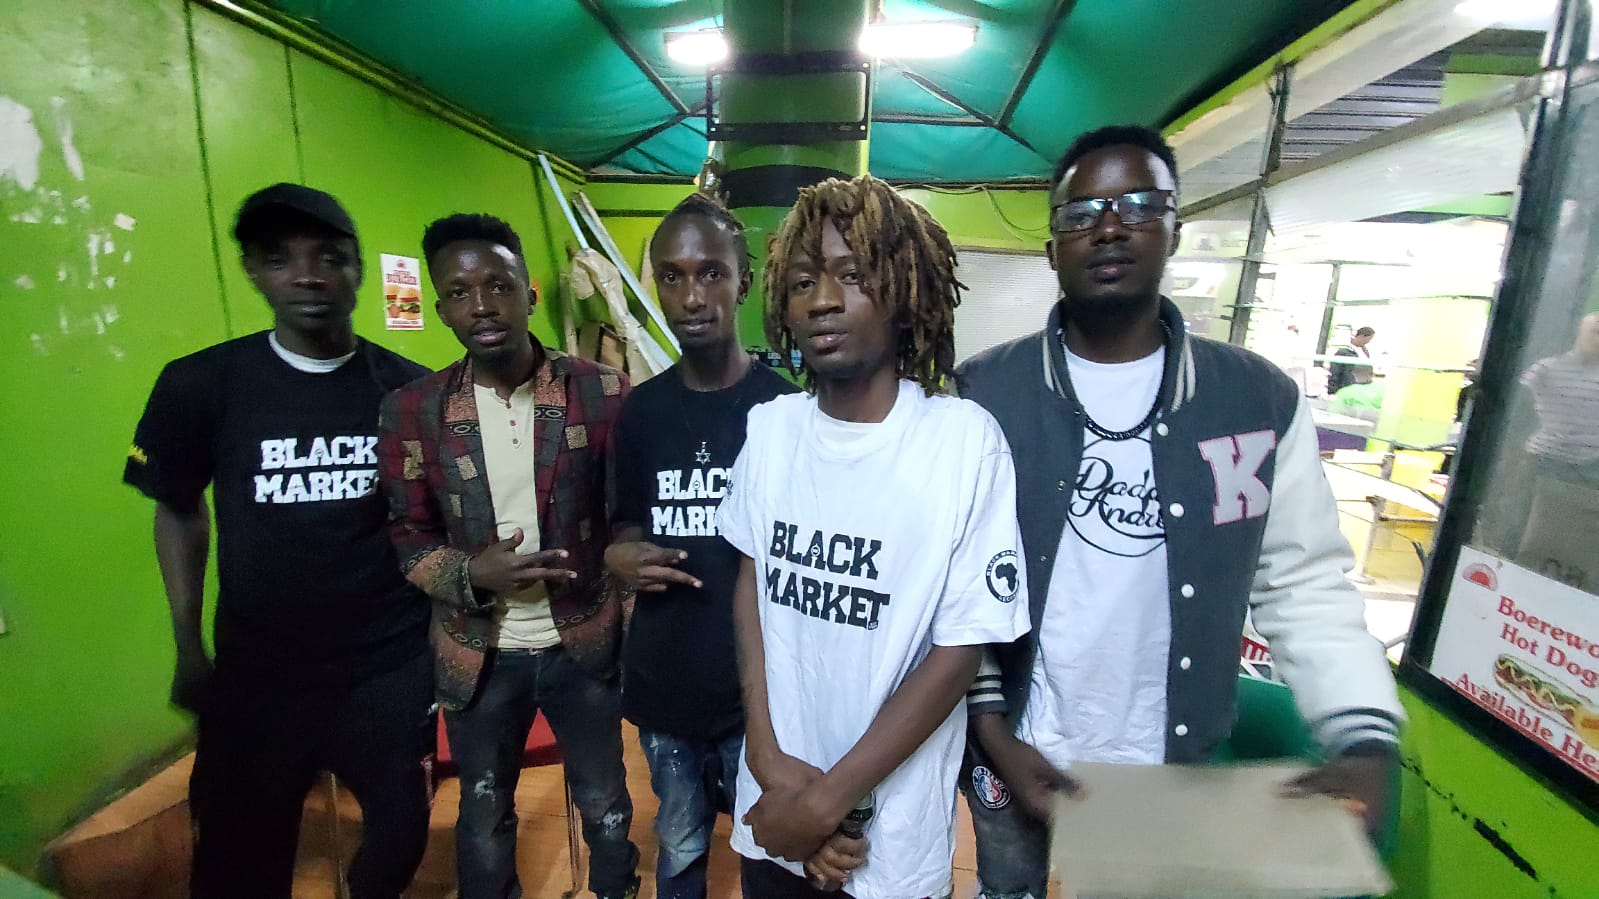 “Masterpice ni hypocrite” Boondocks Gang throws shade to Willy Paul and other gospel artists